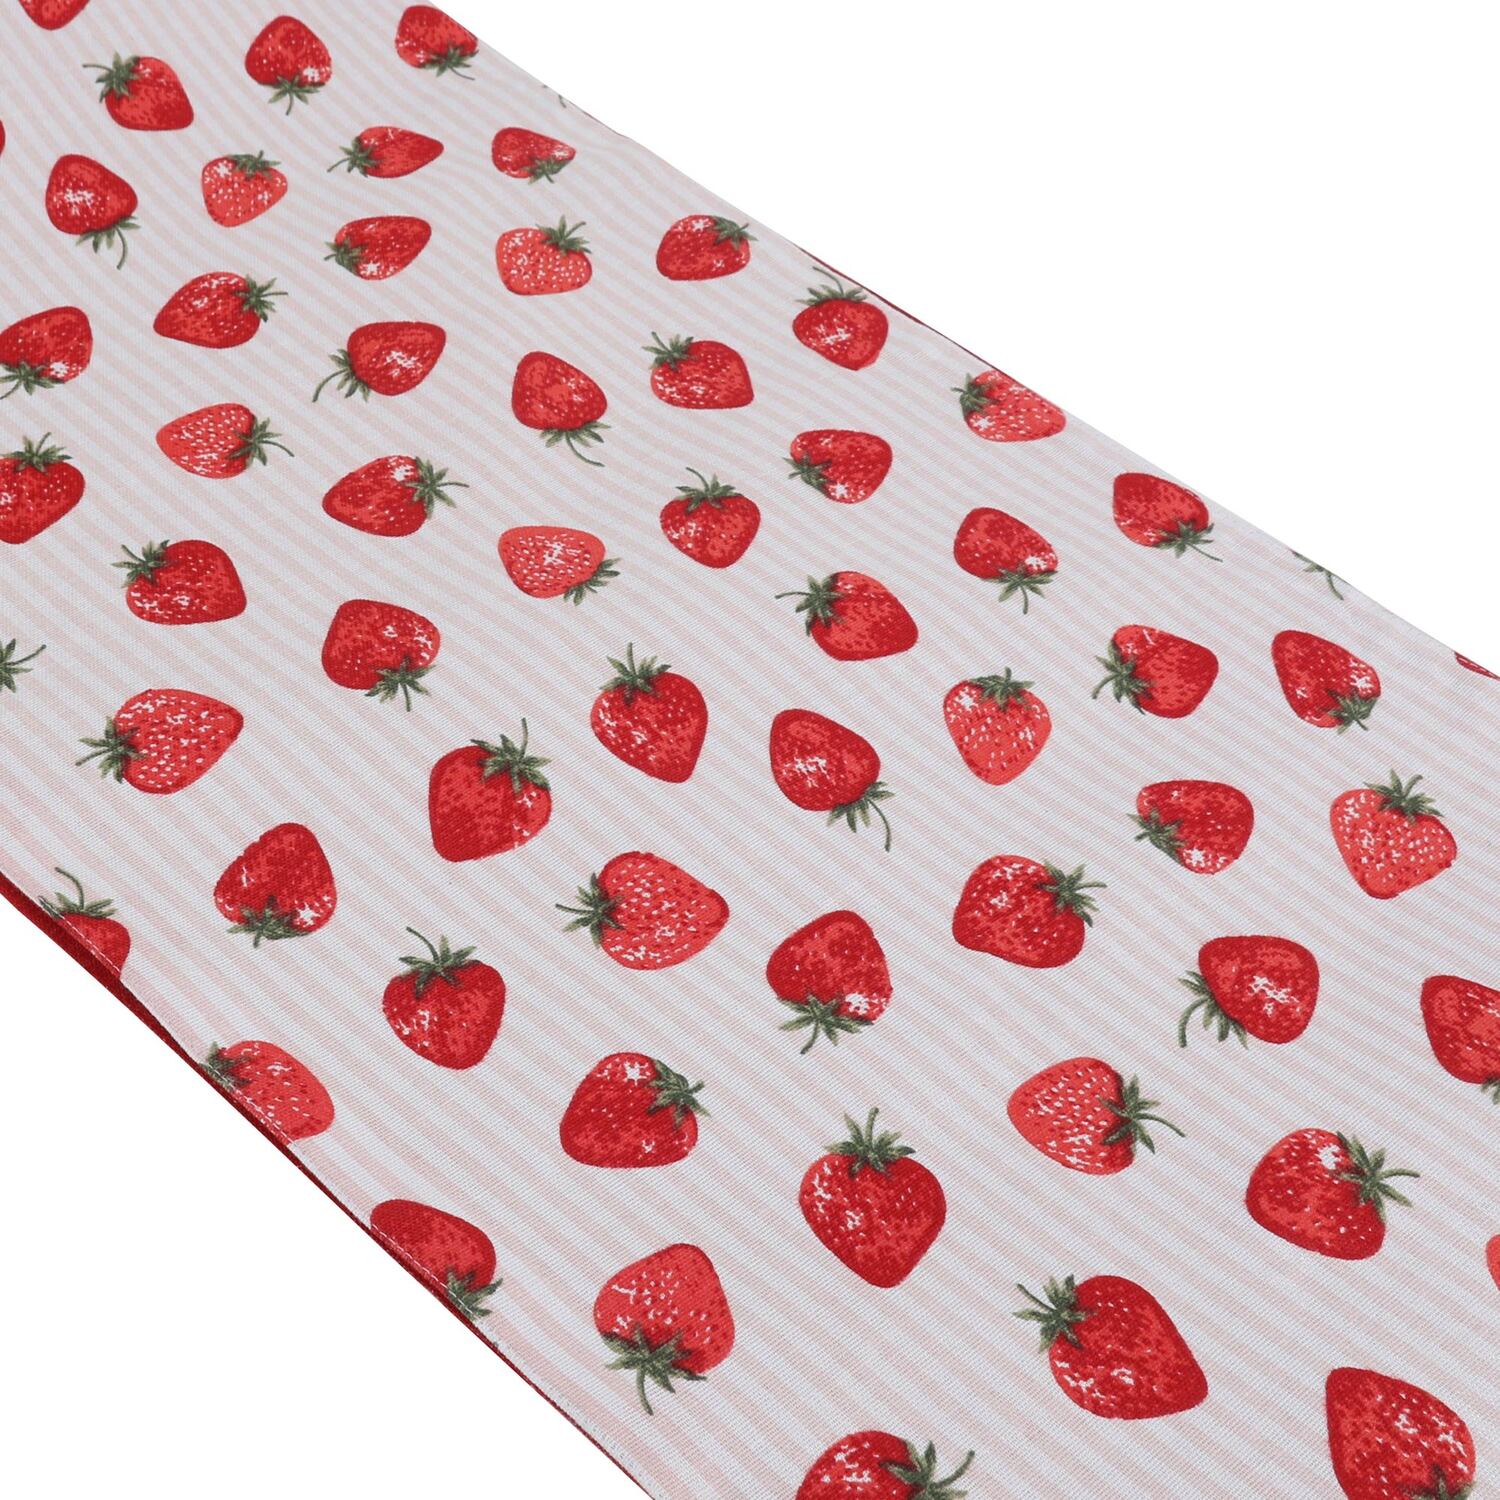 Strawberry Table Runner - Red Image 3